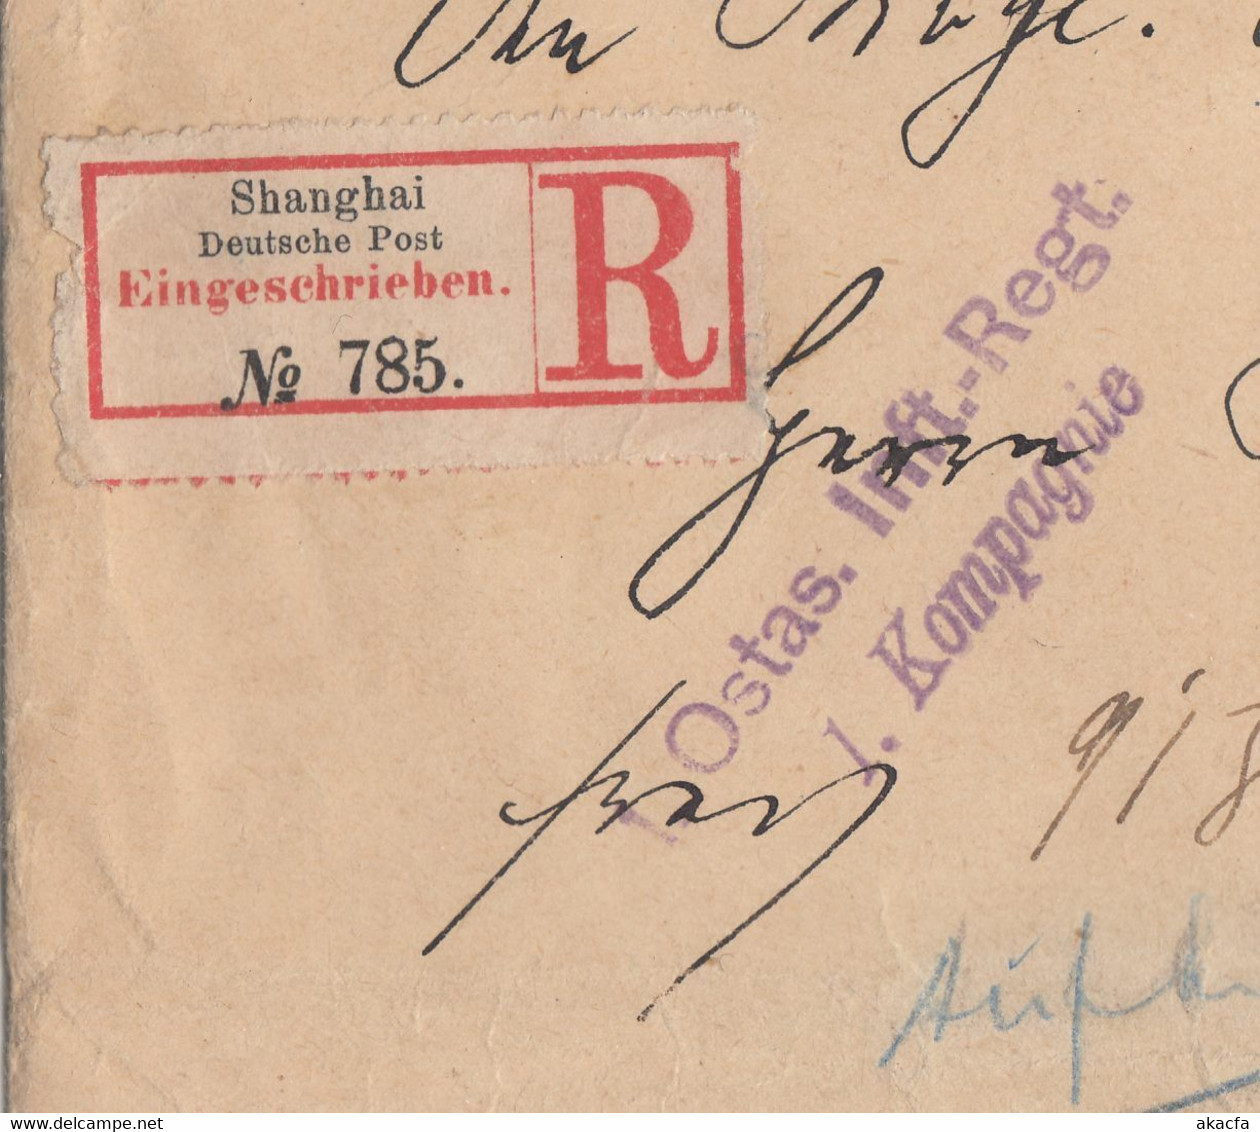 CHINA 1902 Registered Cover Deutsche Post Shanghai Mixed Franking (c023) - Covers & Documents